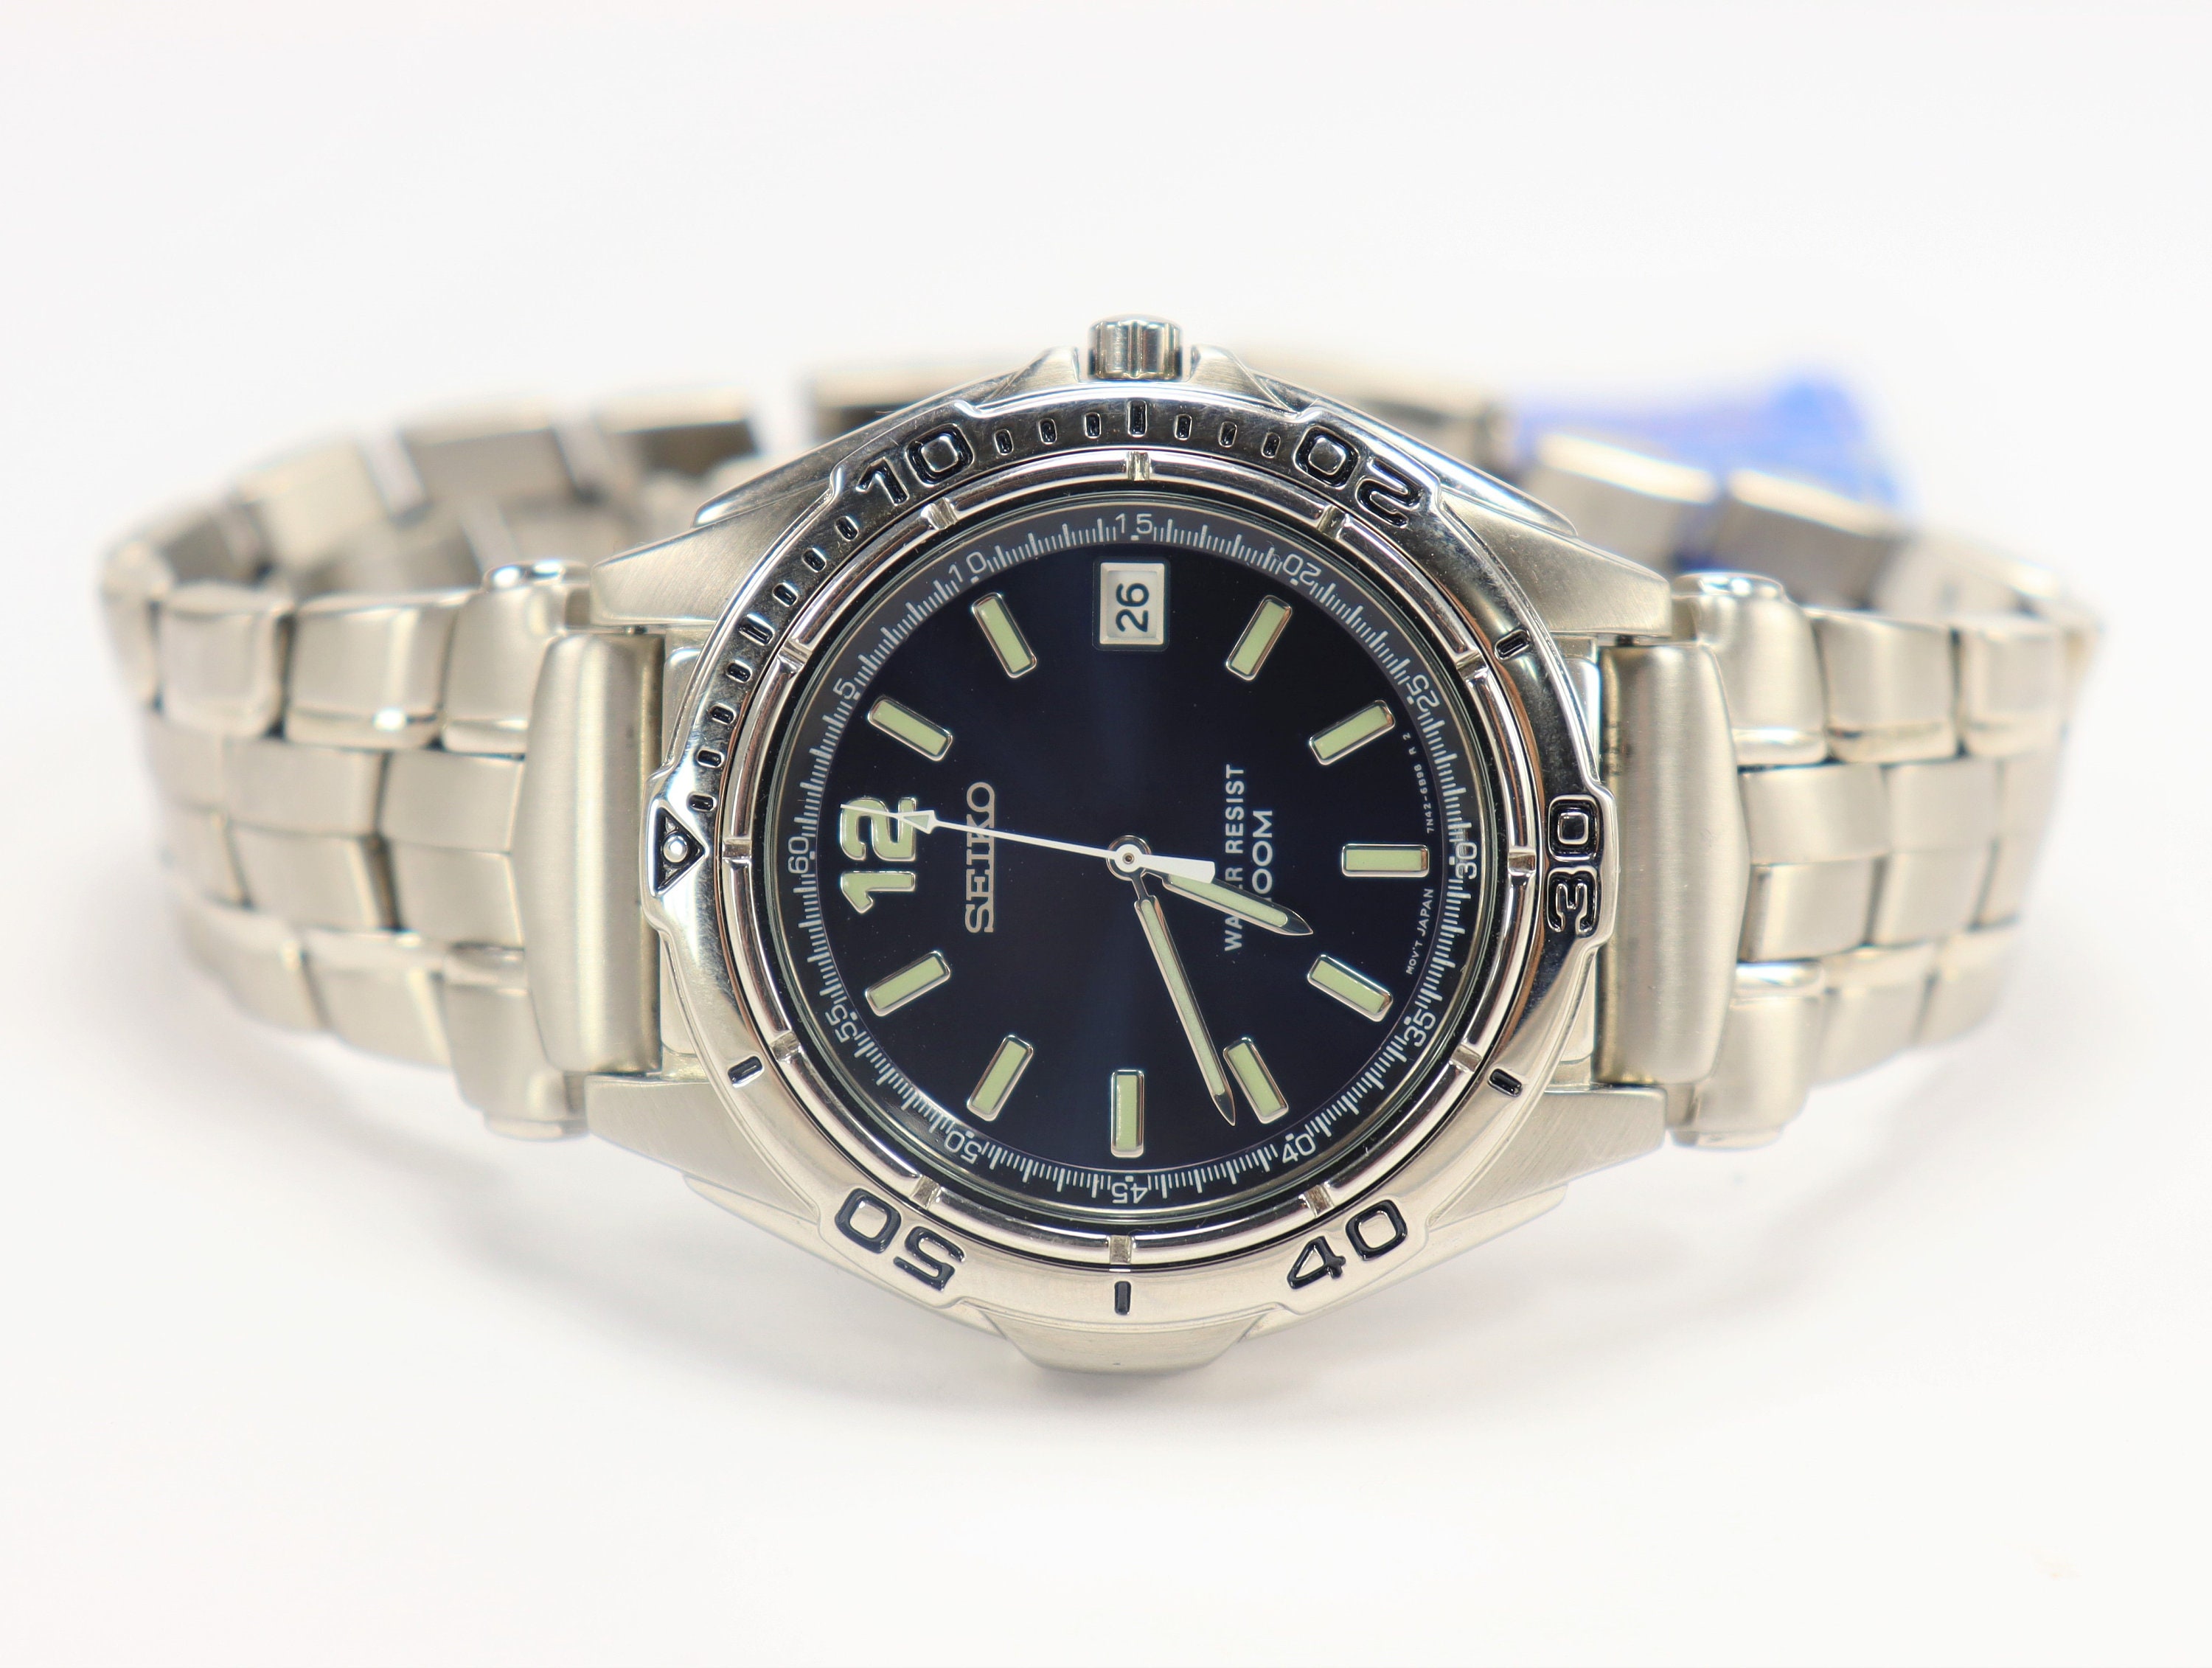 Seiko the Great Blue Stainless Steel Watch VERY RARE - Etsy